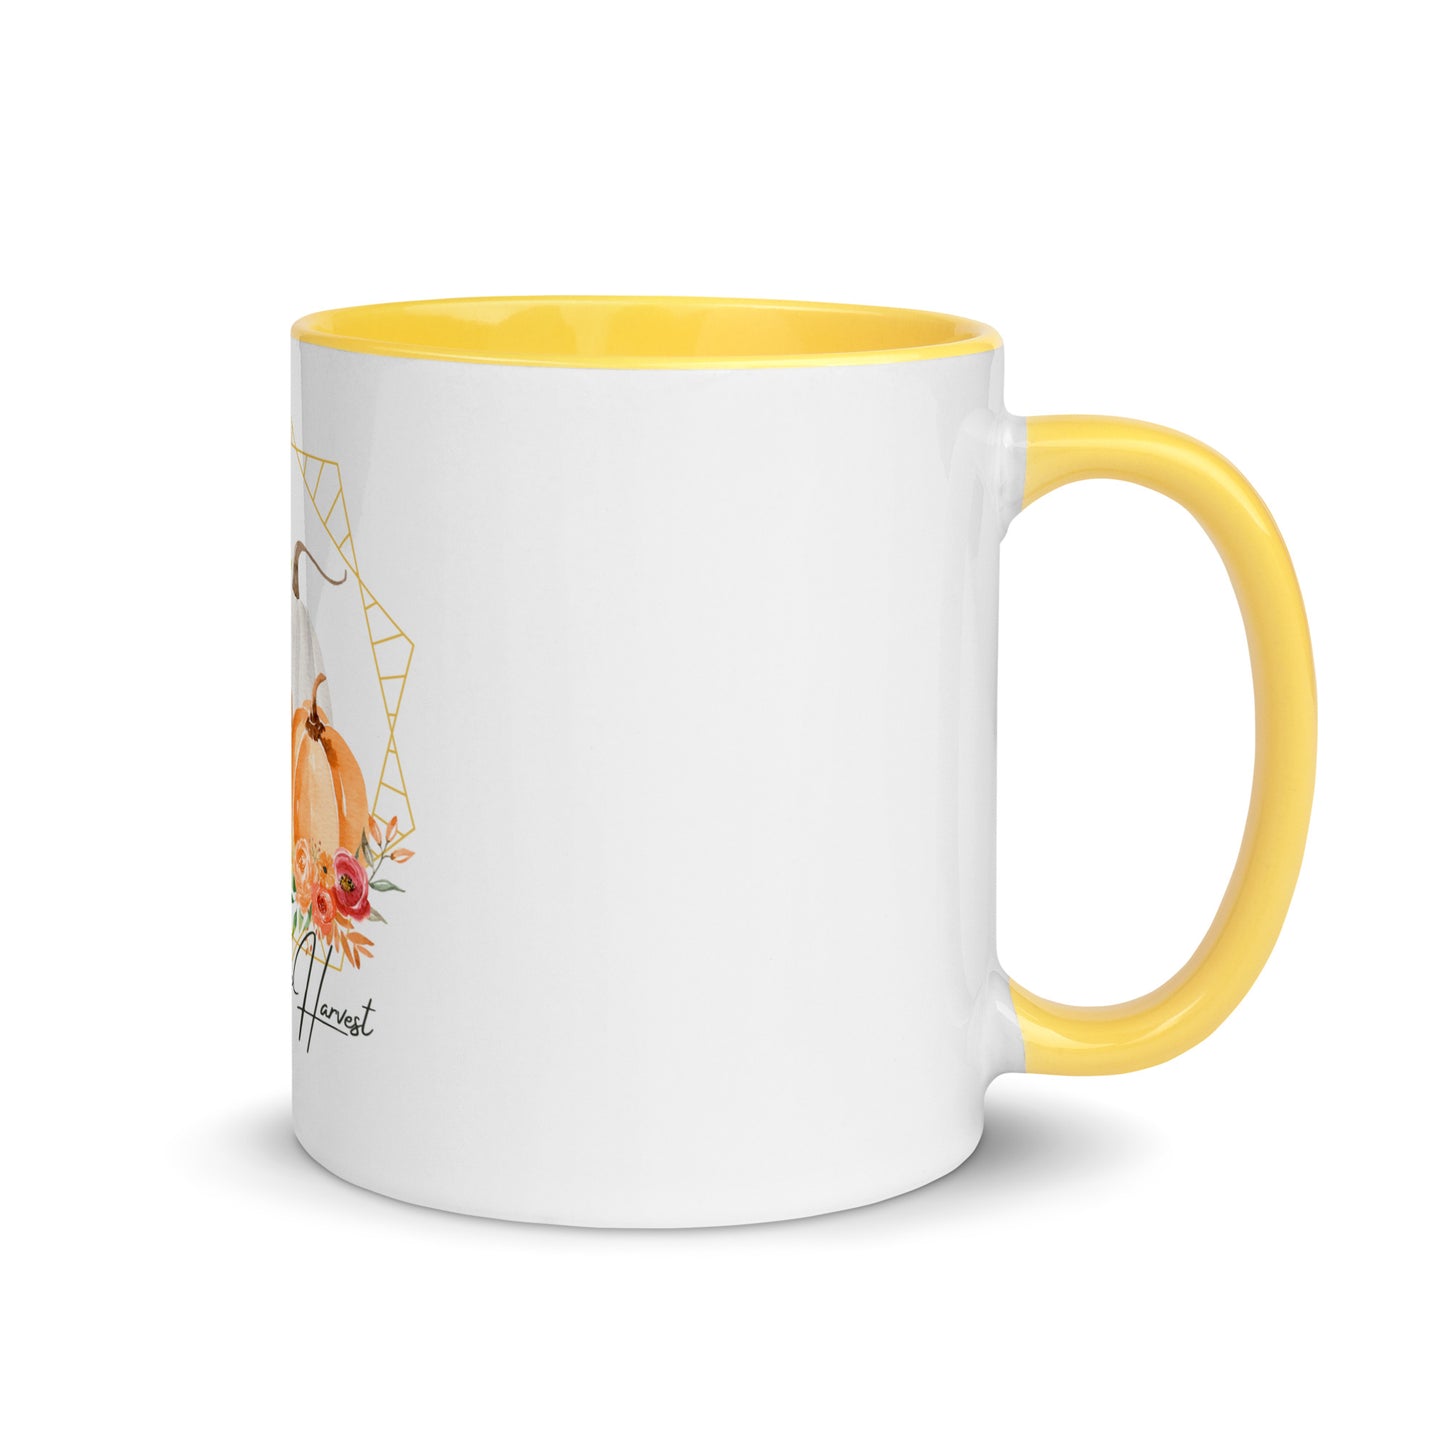 Queen of the Harvest | Mug with Color Inside